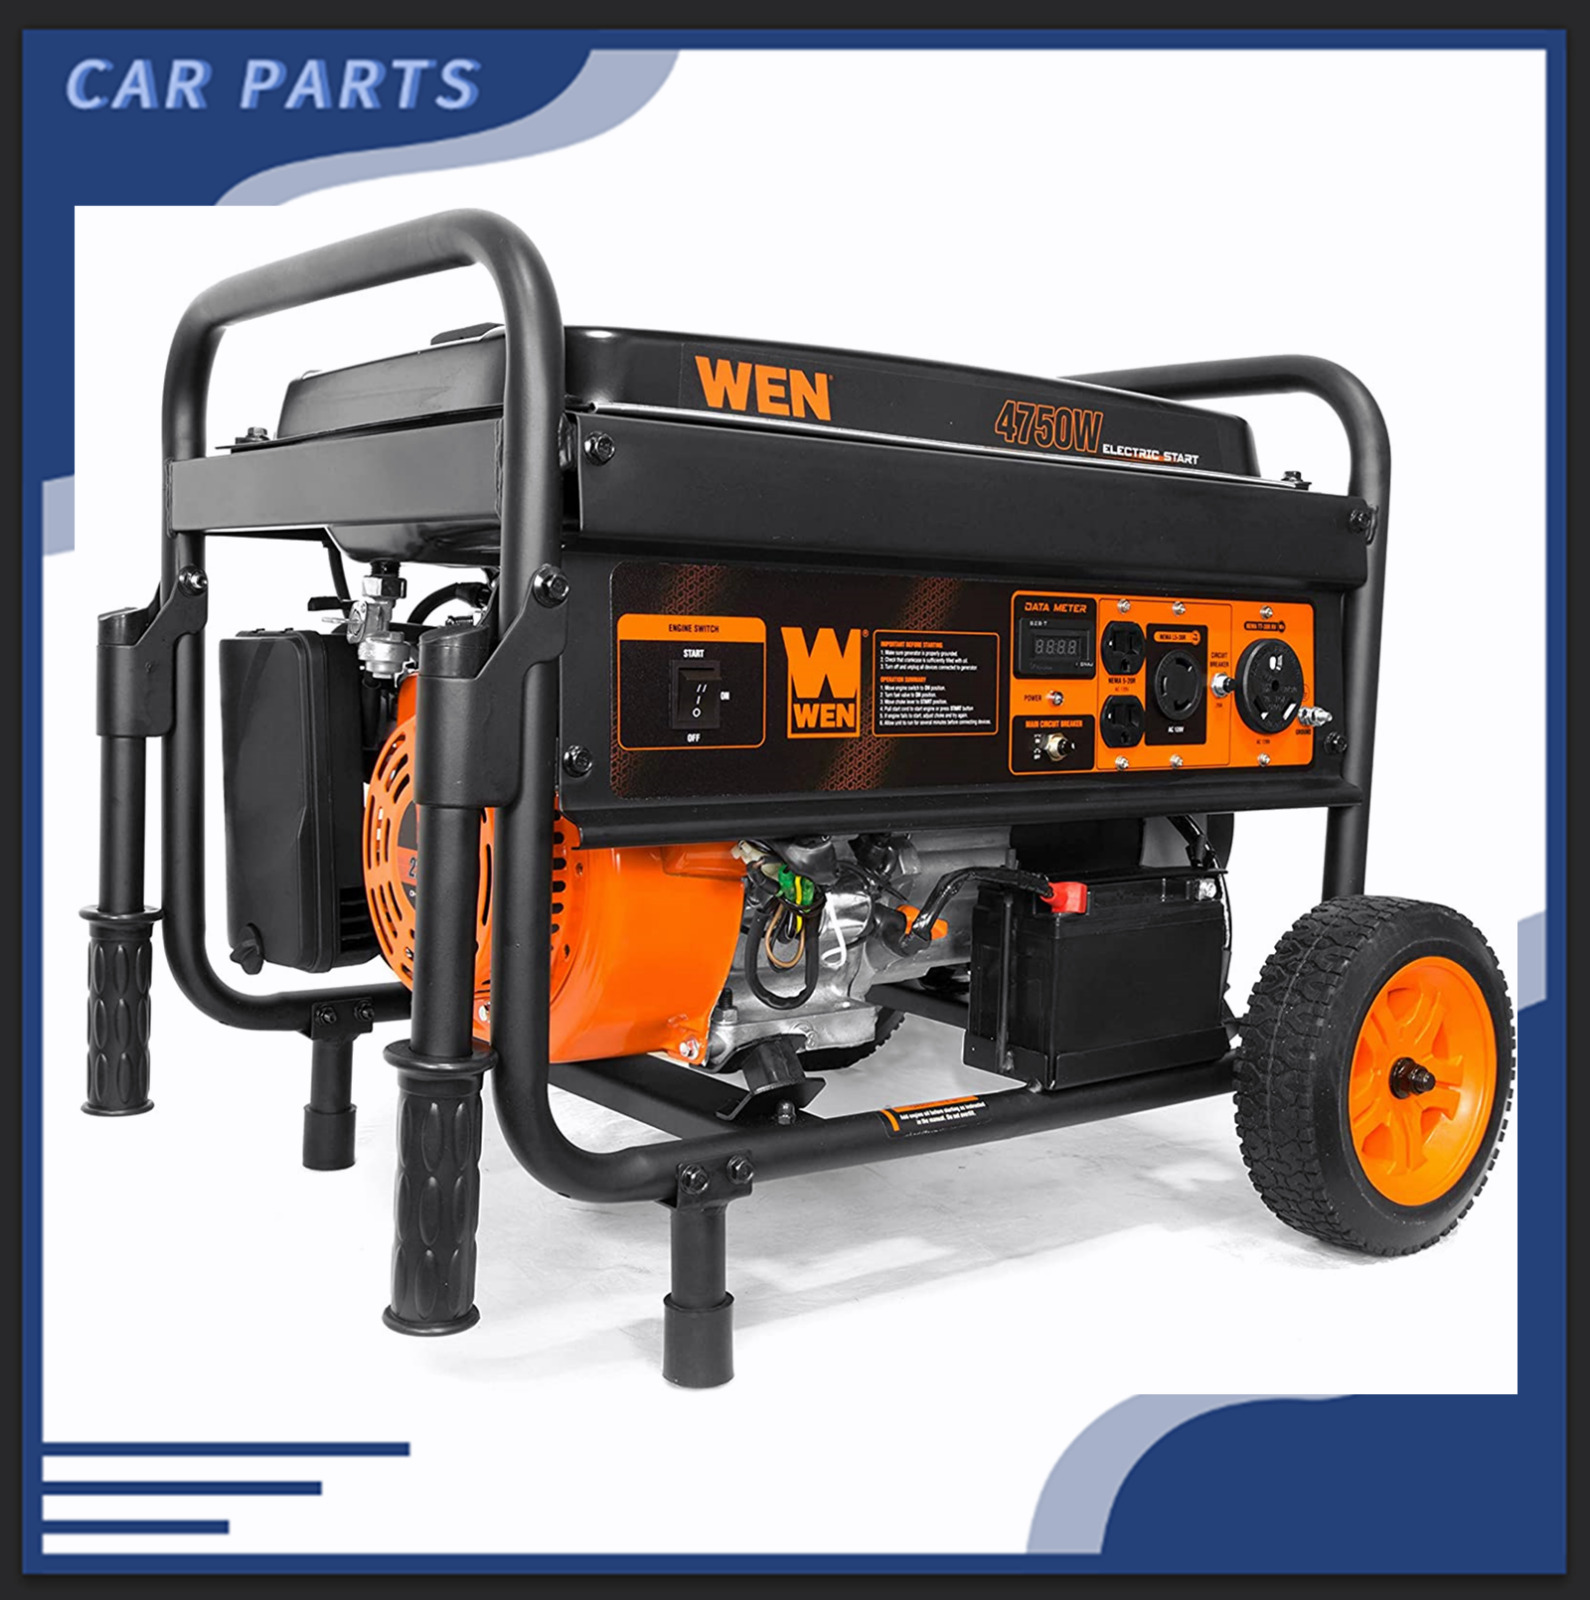 4750-watt WEN Generator with Electric Start and Wheel Kit CARB Compliant 5647